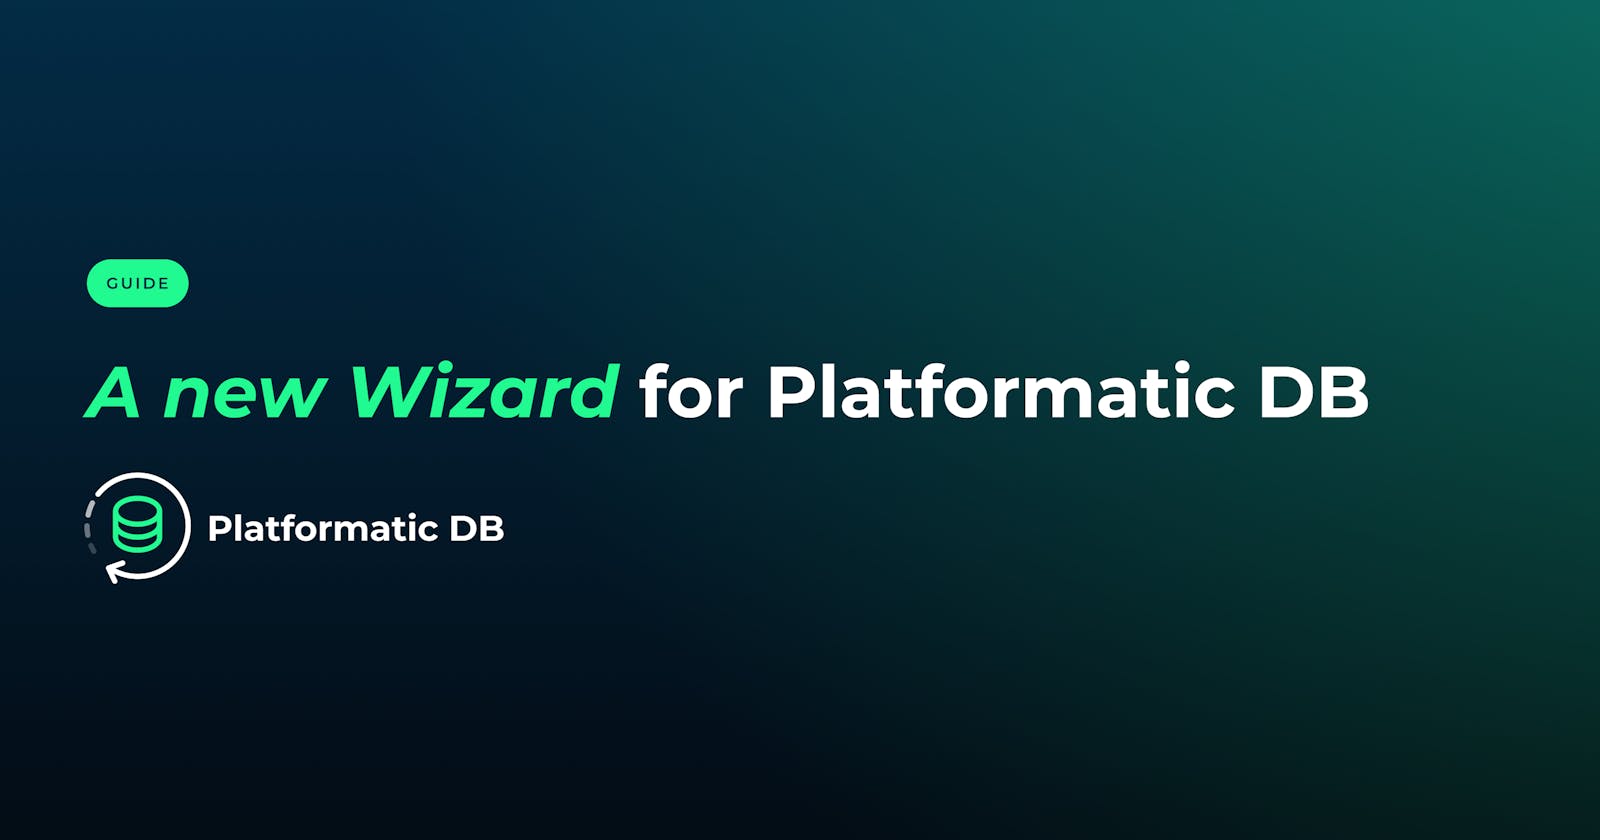 Introducing a New Wizard for Platformatic DB